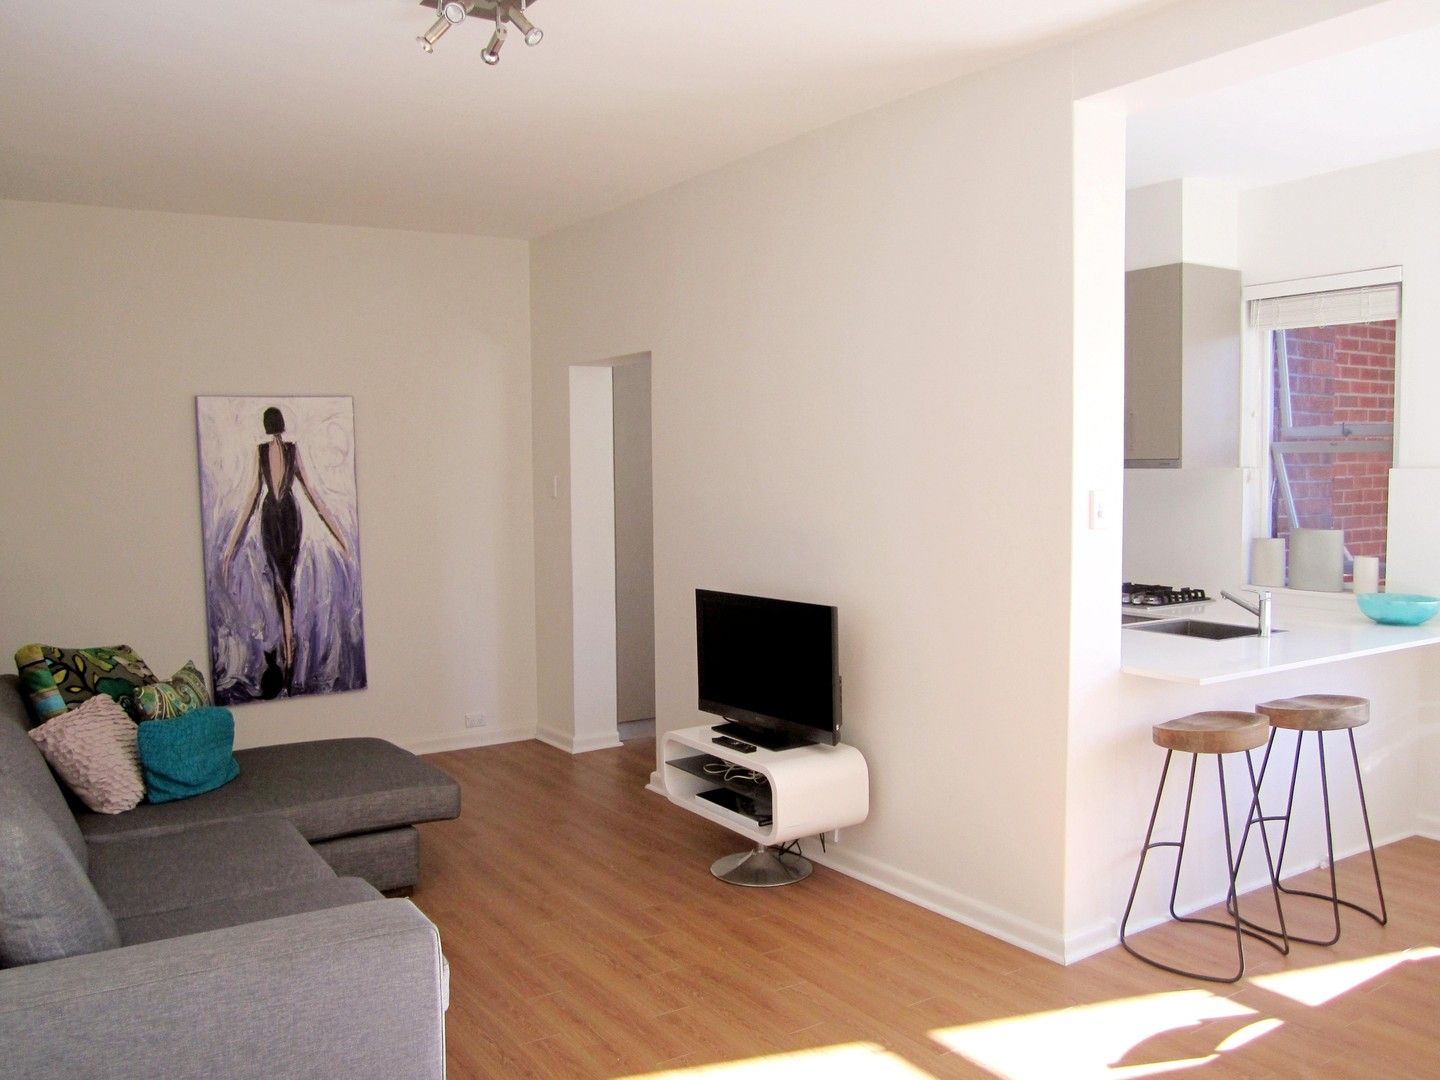 2 bedrooms Apartment / Unit / Flat in 11/6 Holt Street DOUBLE BAY NSW, 2028